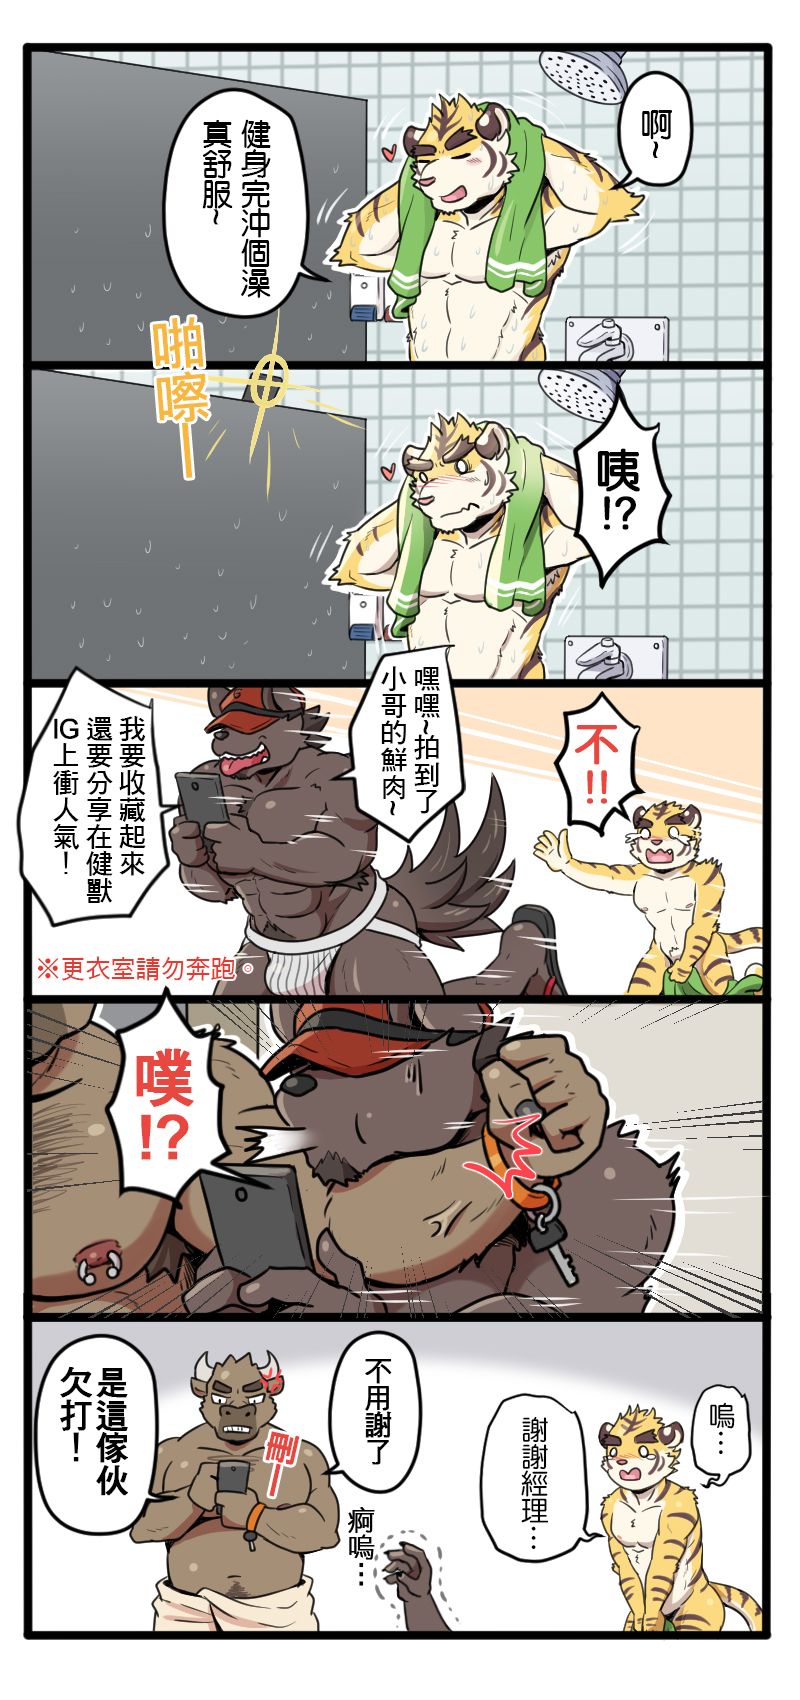 [Ripple Moon (漣漪月影)] Gym Pals - Pal and his gym pals' gaily daily life [Chinese] (ongoing) - Page 8